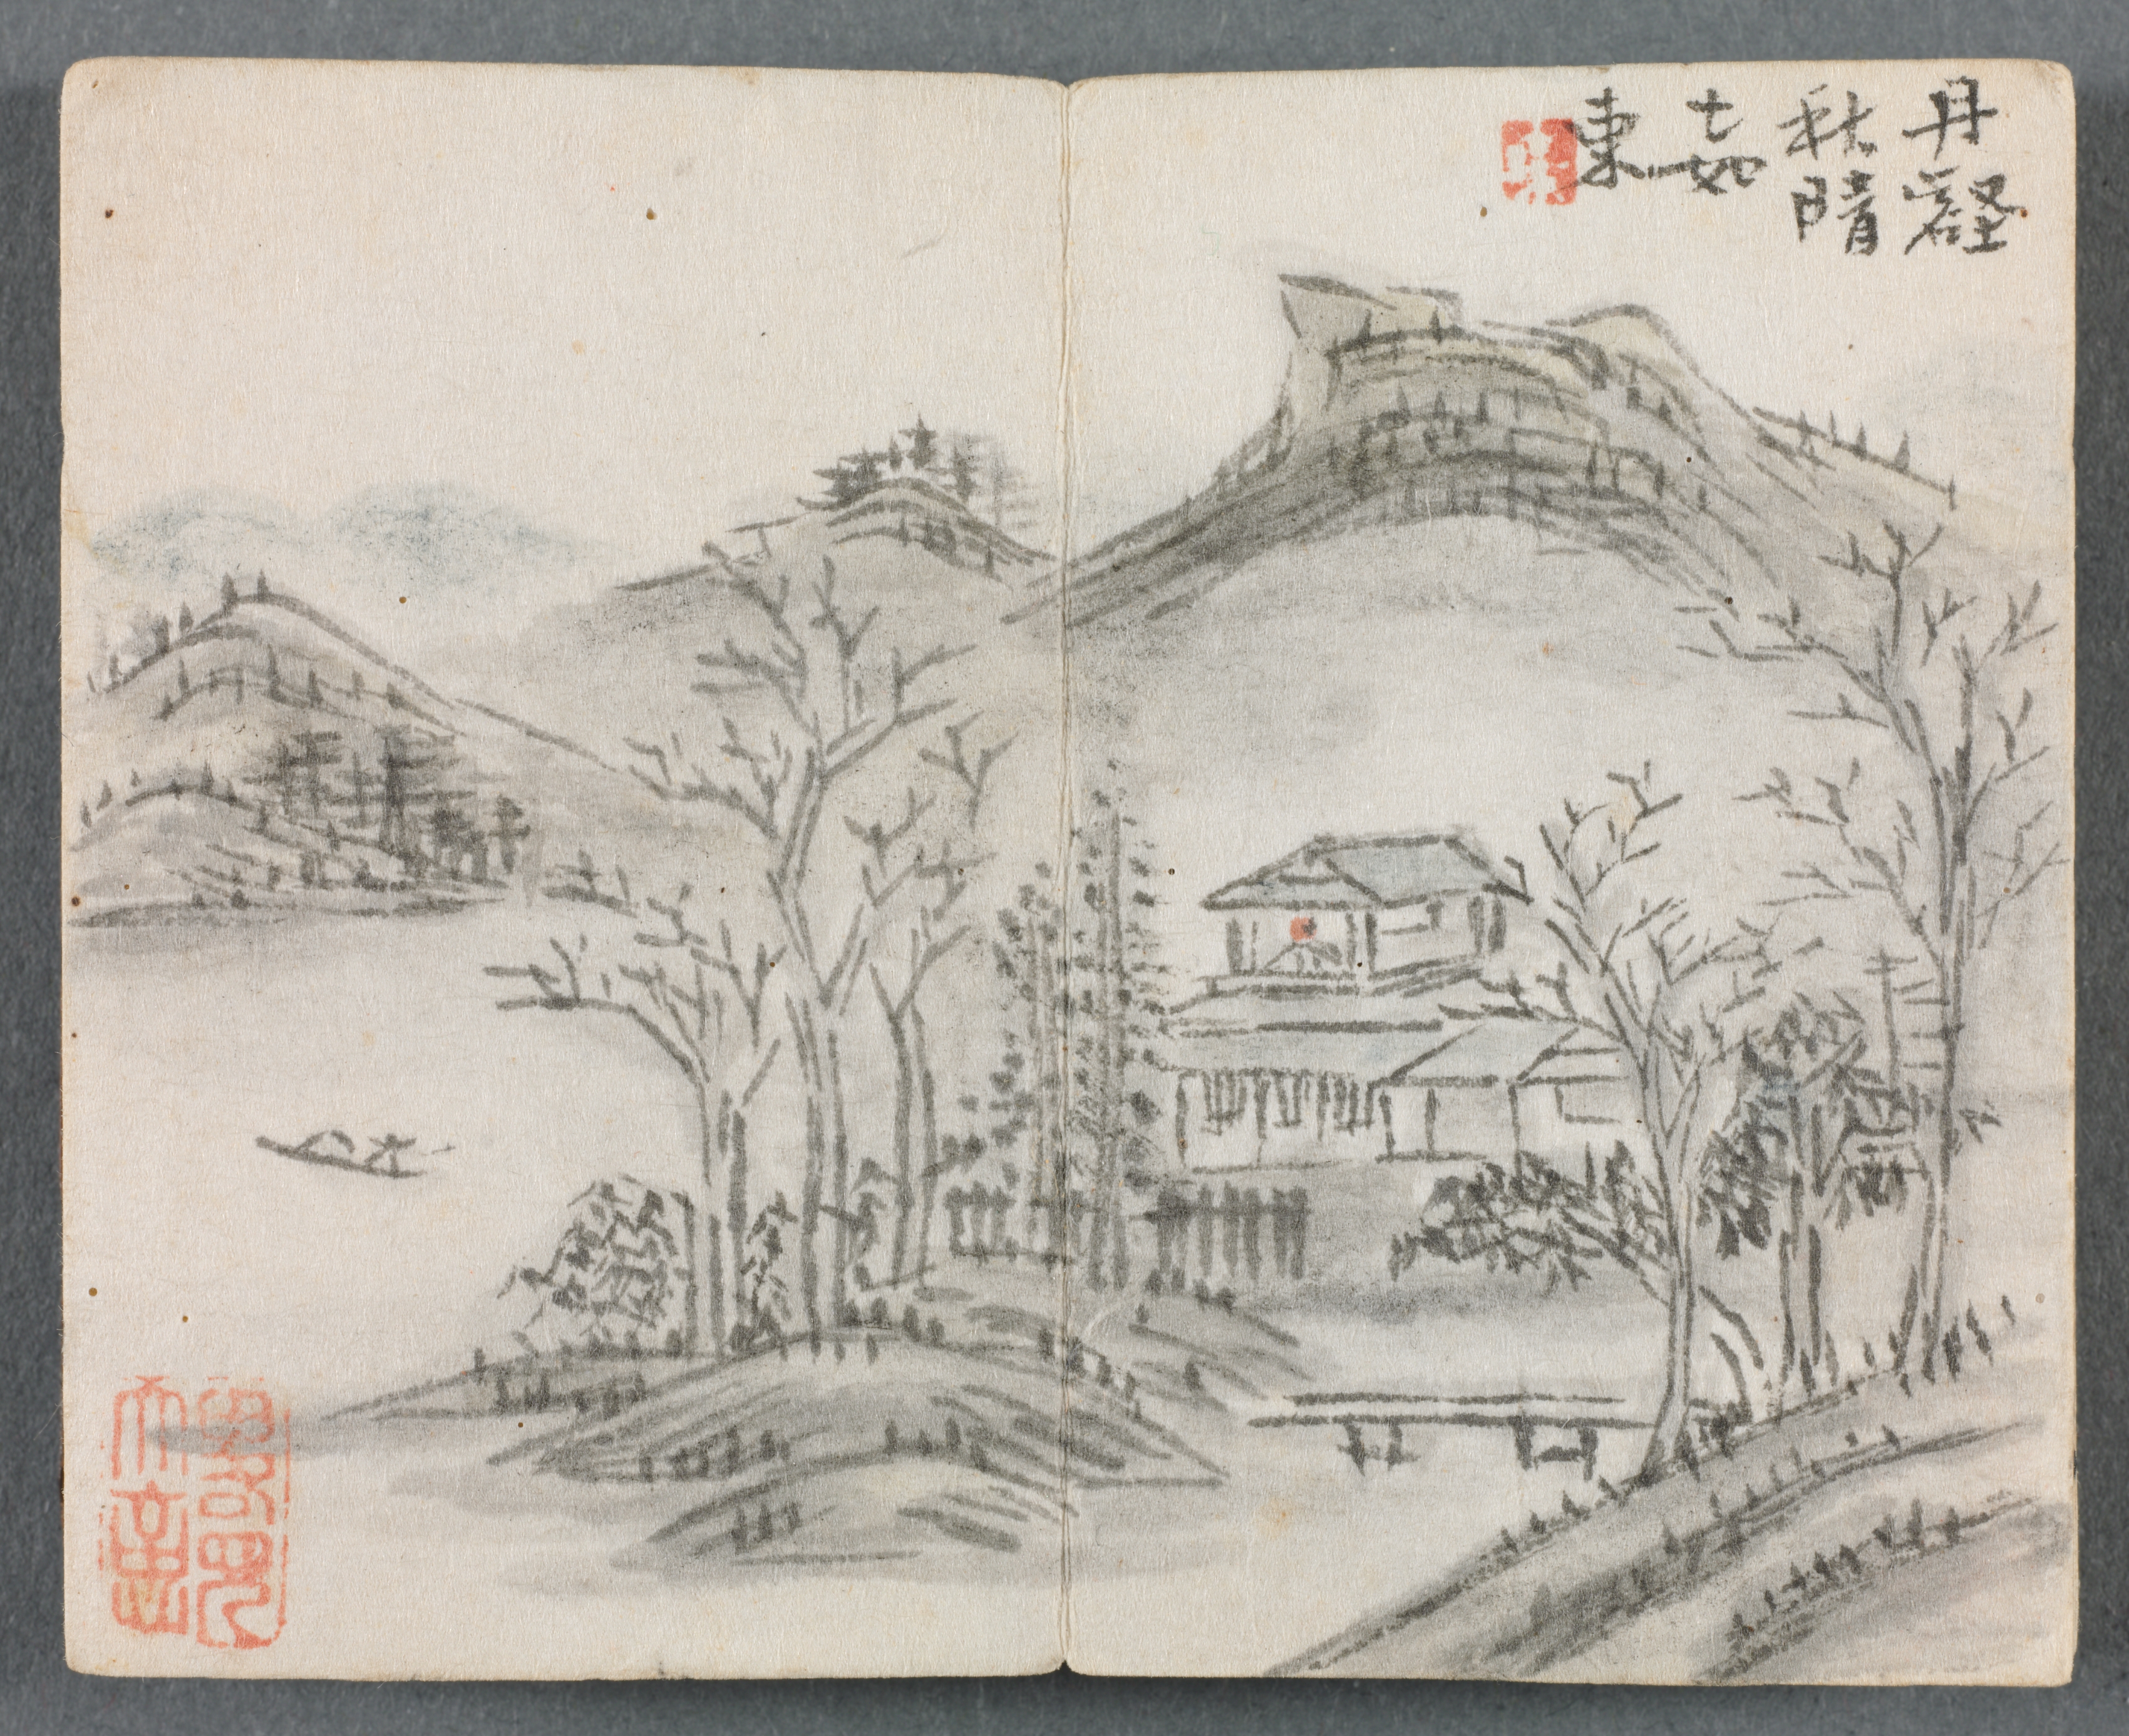 Miniature Album with Figures and Landscape (Landscape with Hill, House, Boat and Bridge)